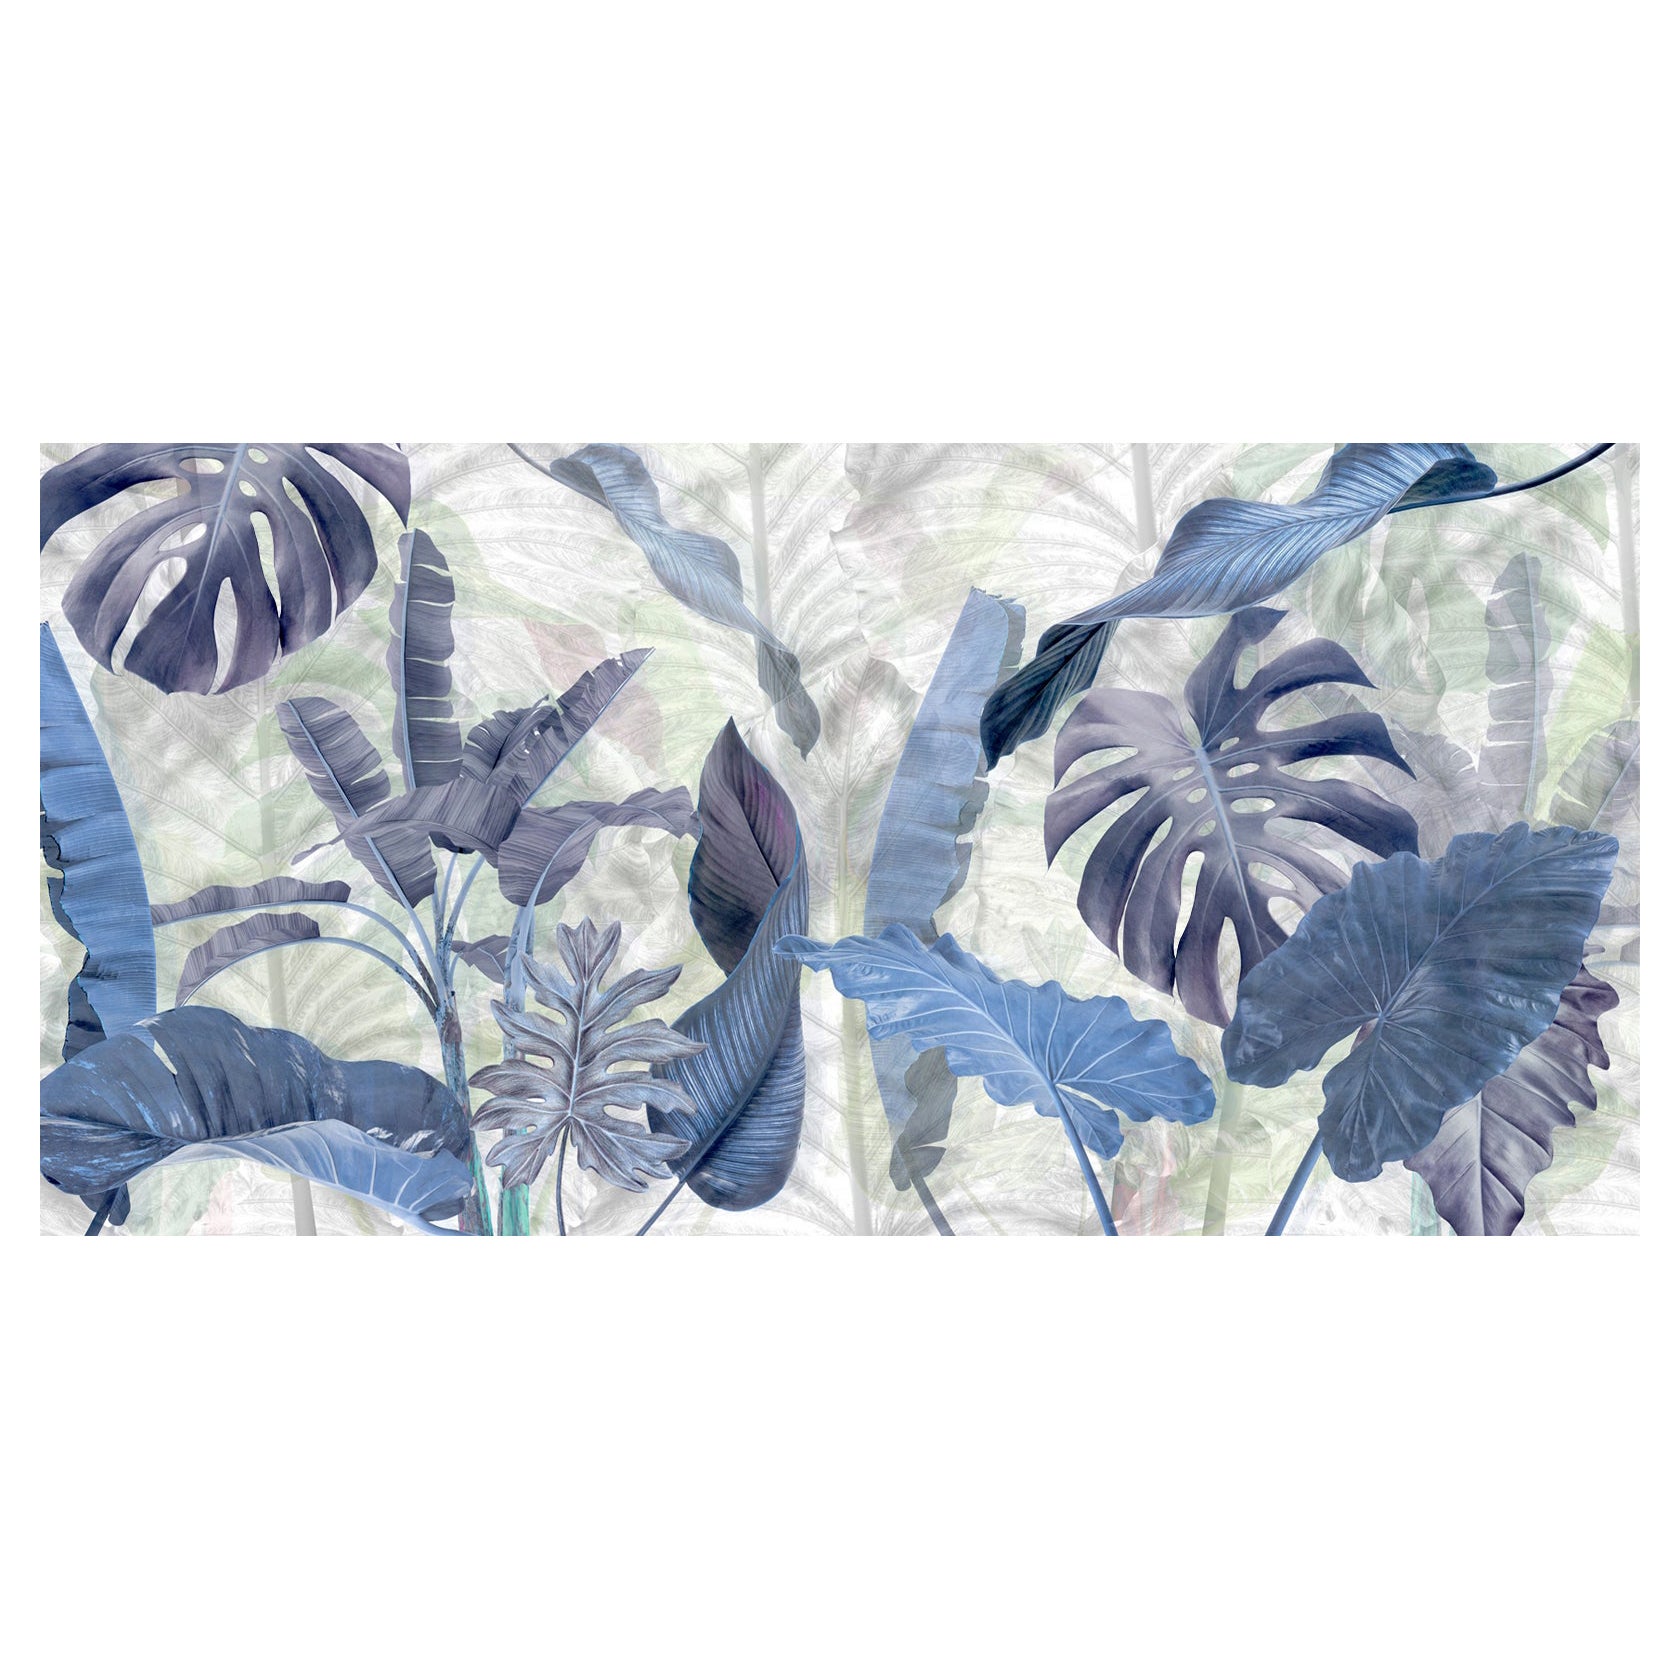 EDGE Collections JungleScape Daylight;  a whimsical nod to endless Summers For Sale